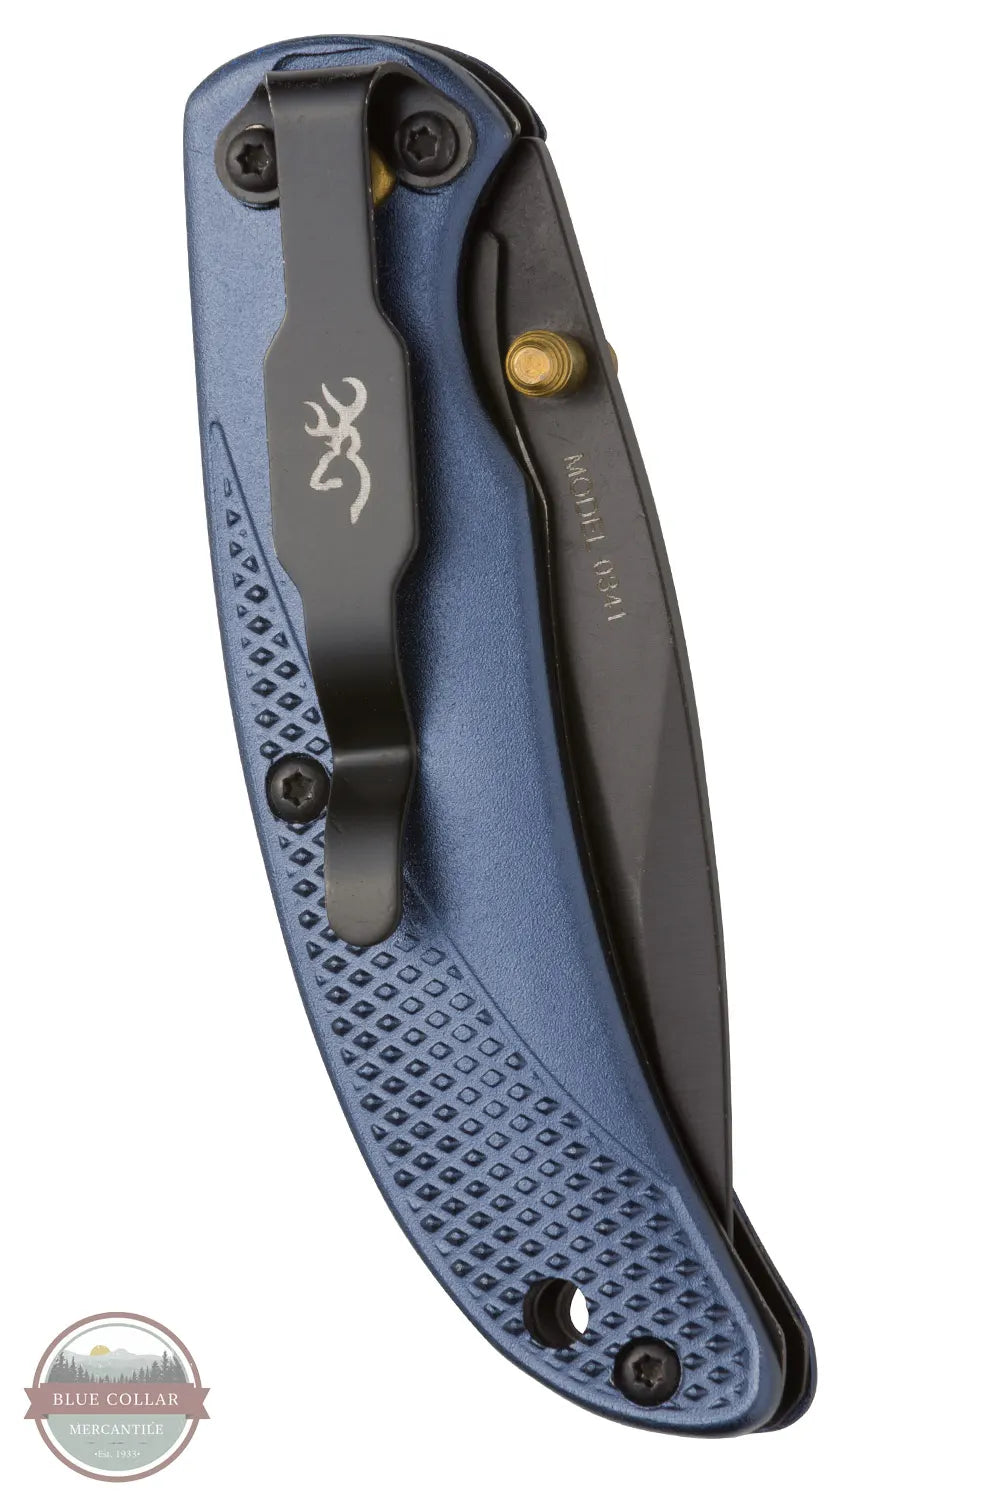 Browning 3220341 Prism III Pocket Knife in Blue closed